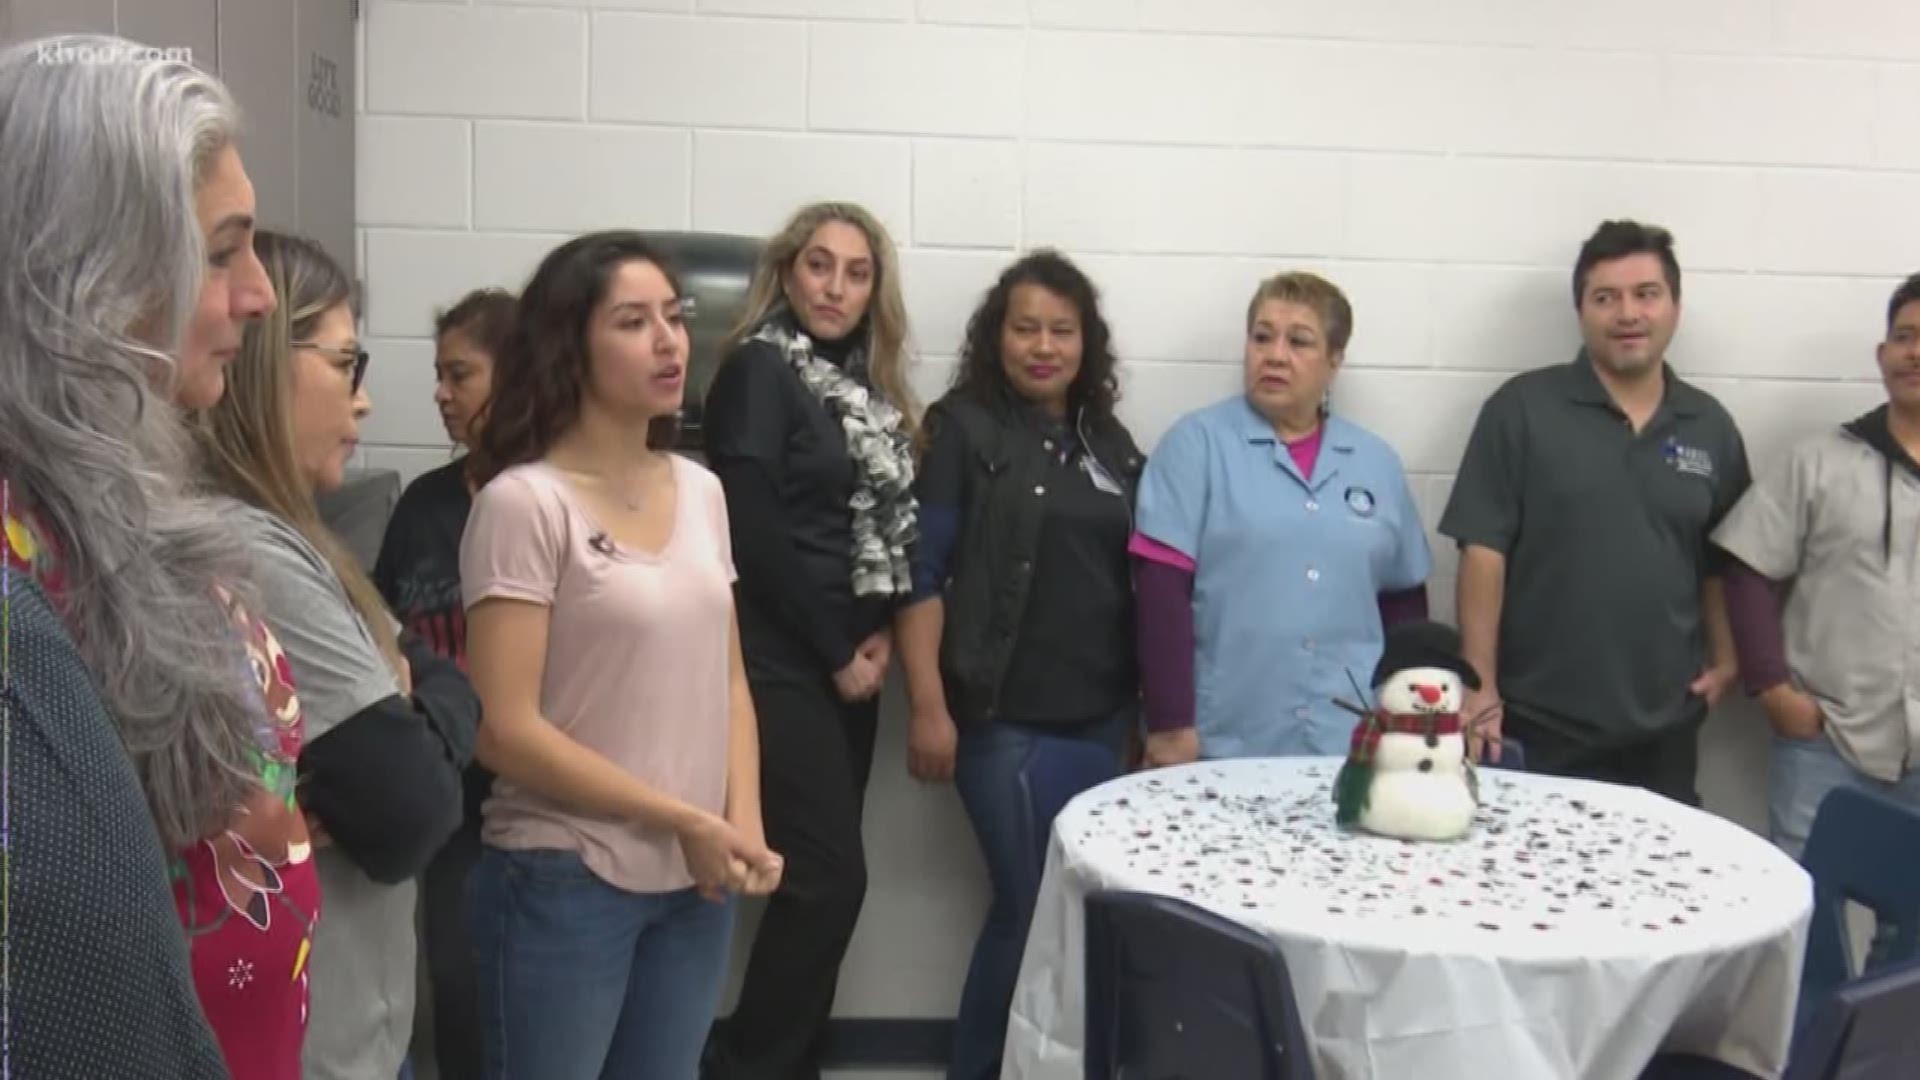 Students are serving up a surprise janitors deserve: A pasta dinner and a red velvet cake to help them say "nothing bundt" thank you.